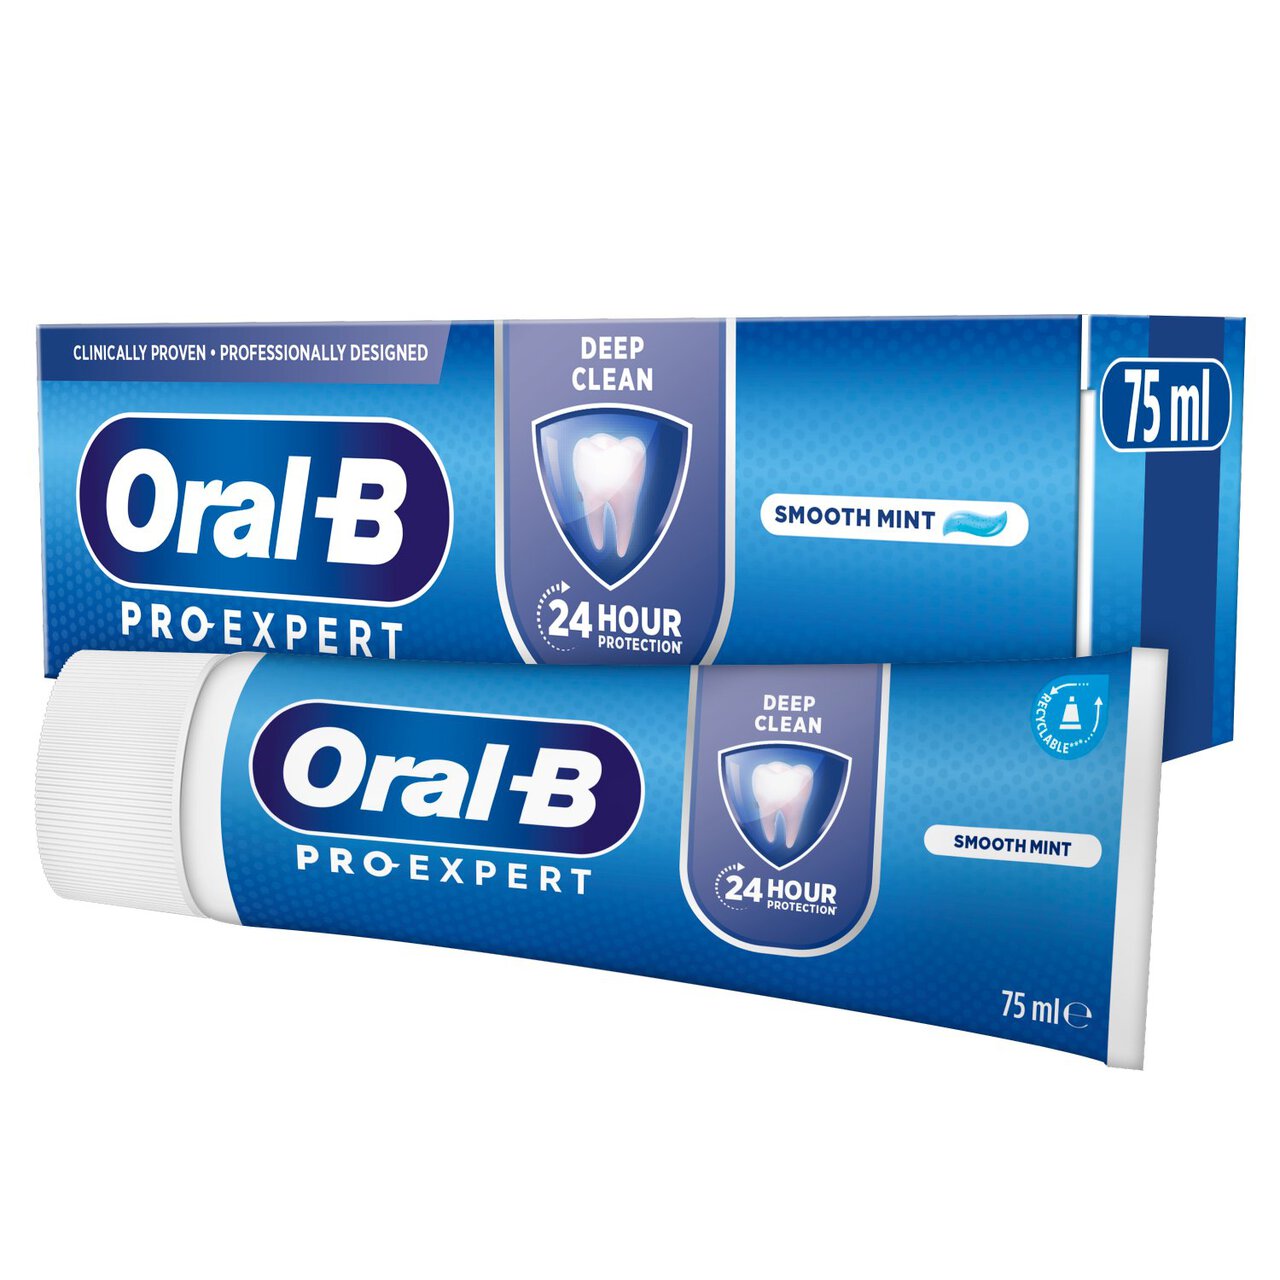 Oral-B Pro Expert Deep Clean Mint Toothpaste 75ml